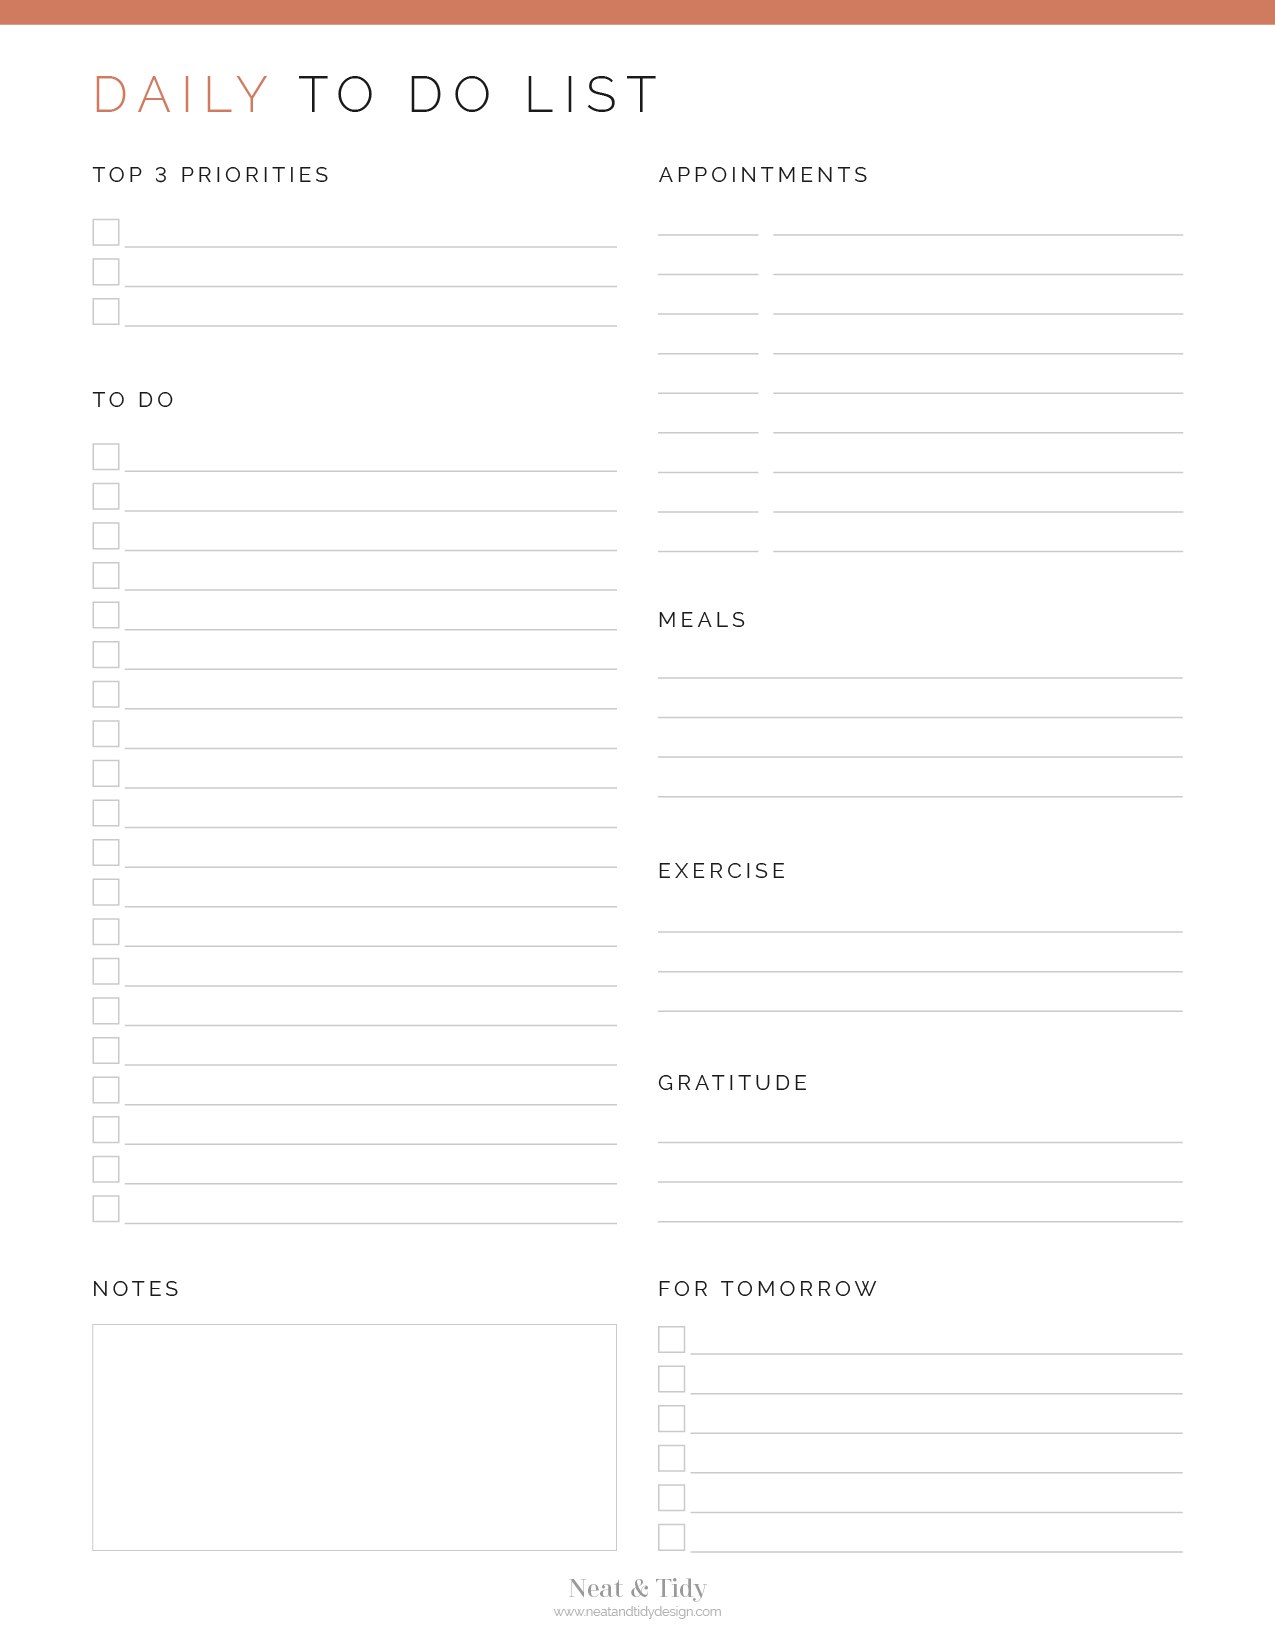 Daily-To-Do-List planner page